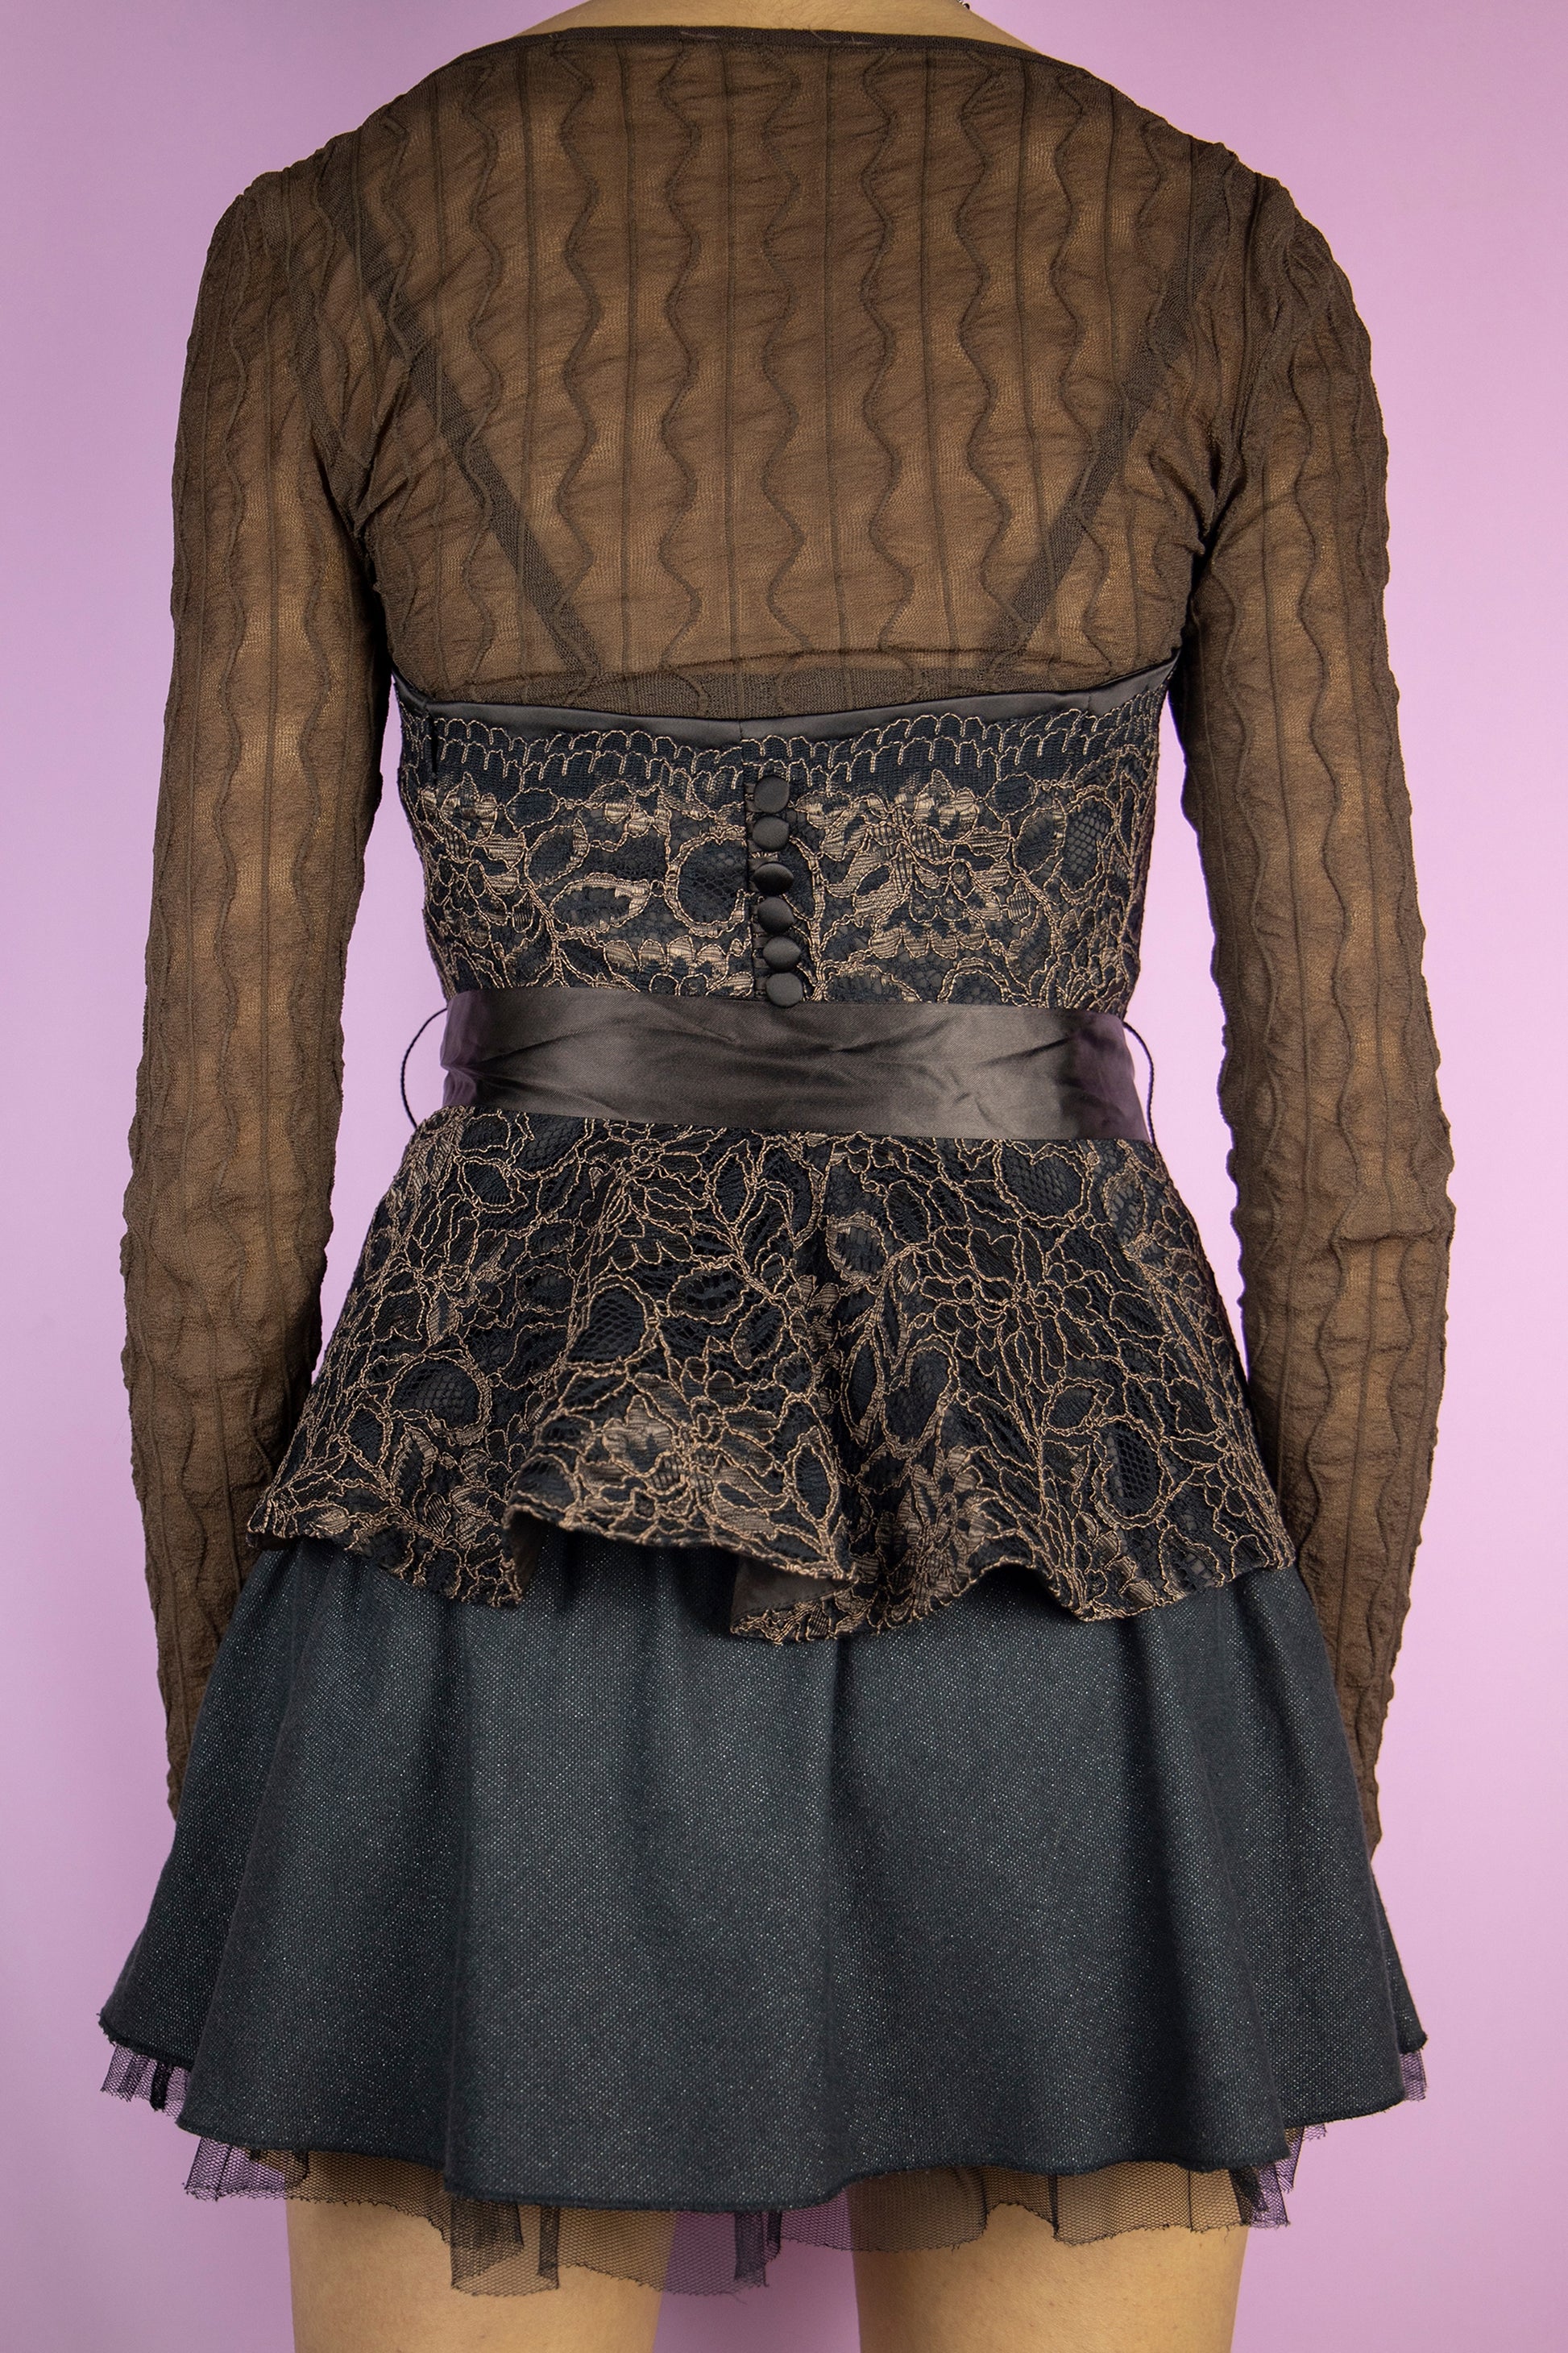 The Y2K Brown Lace Corset Top is a vintage brown and black strapless lace top with boning, buttons at the back, side zipper closure, and a ribbon that ties like a bow. Elegant fairy goth 2000s party night bustier. </span>The brown long-sleeved top shown underneath is not included.